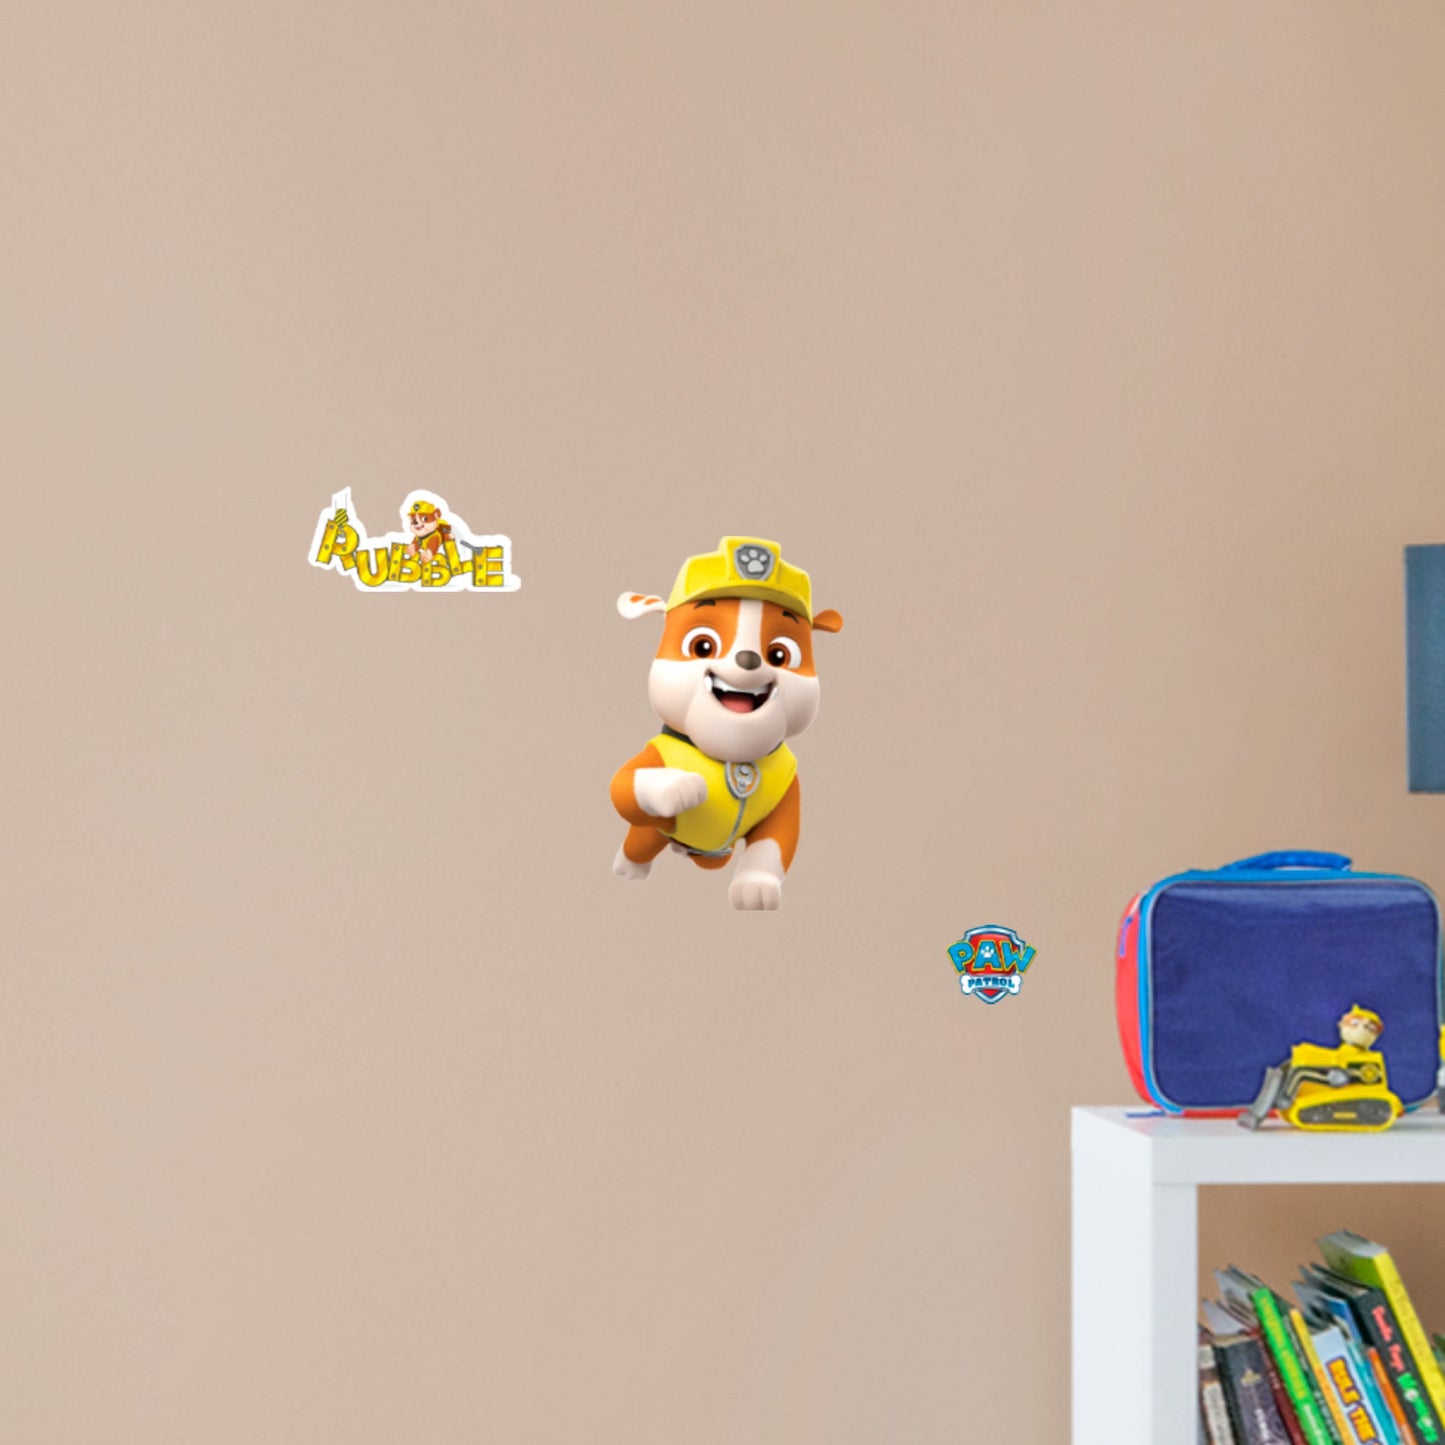 Paw Patrol: Rubble RealBig - Officially Licensed Nickelodeon Removable Adhesive Decal